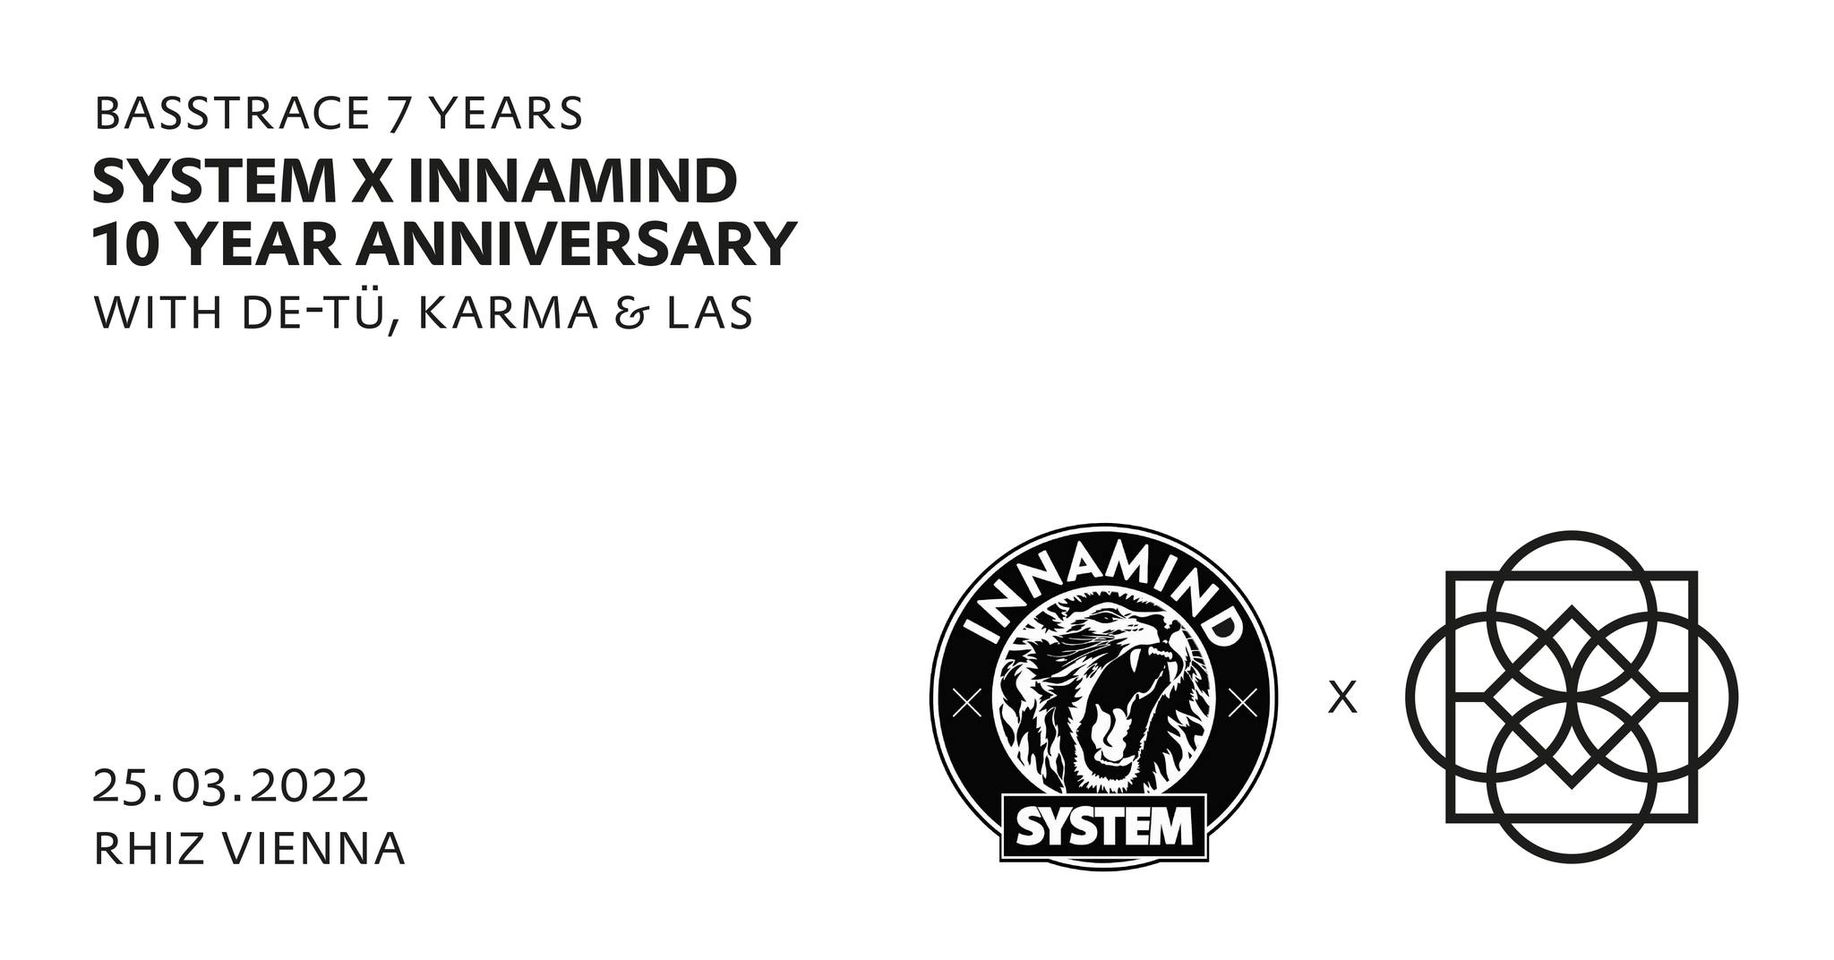 BASSTRACE 7 YEARS meets SYSTEM x INNAMIND 10 YEAR ANNIVERSARY